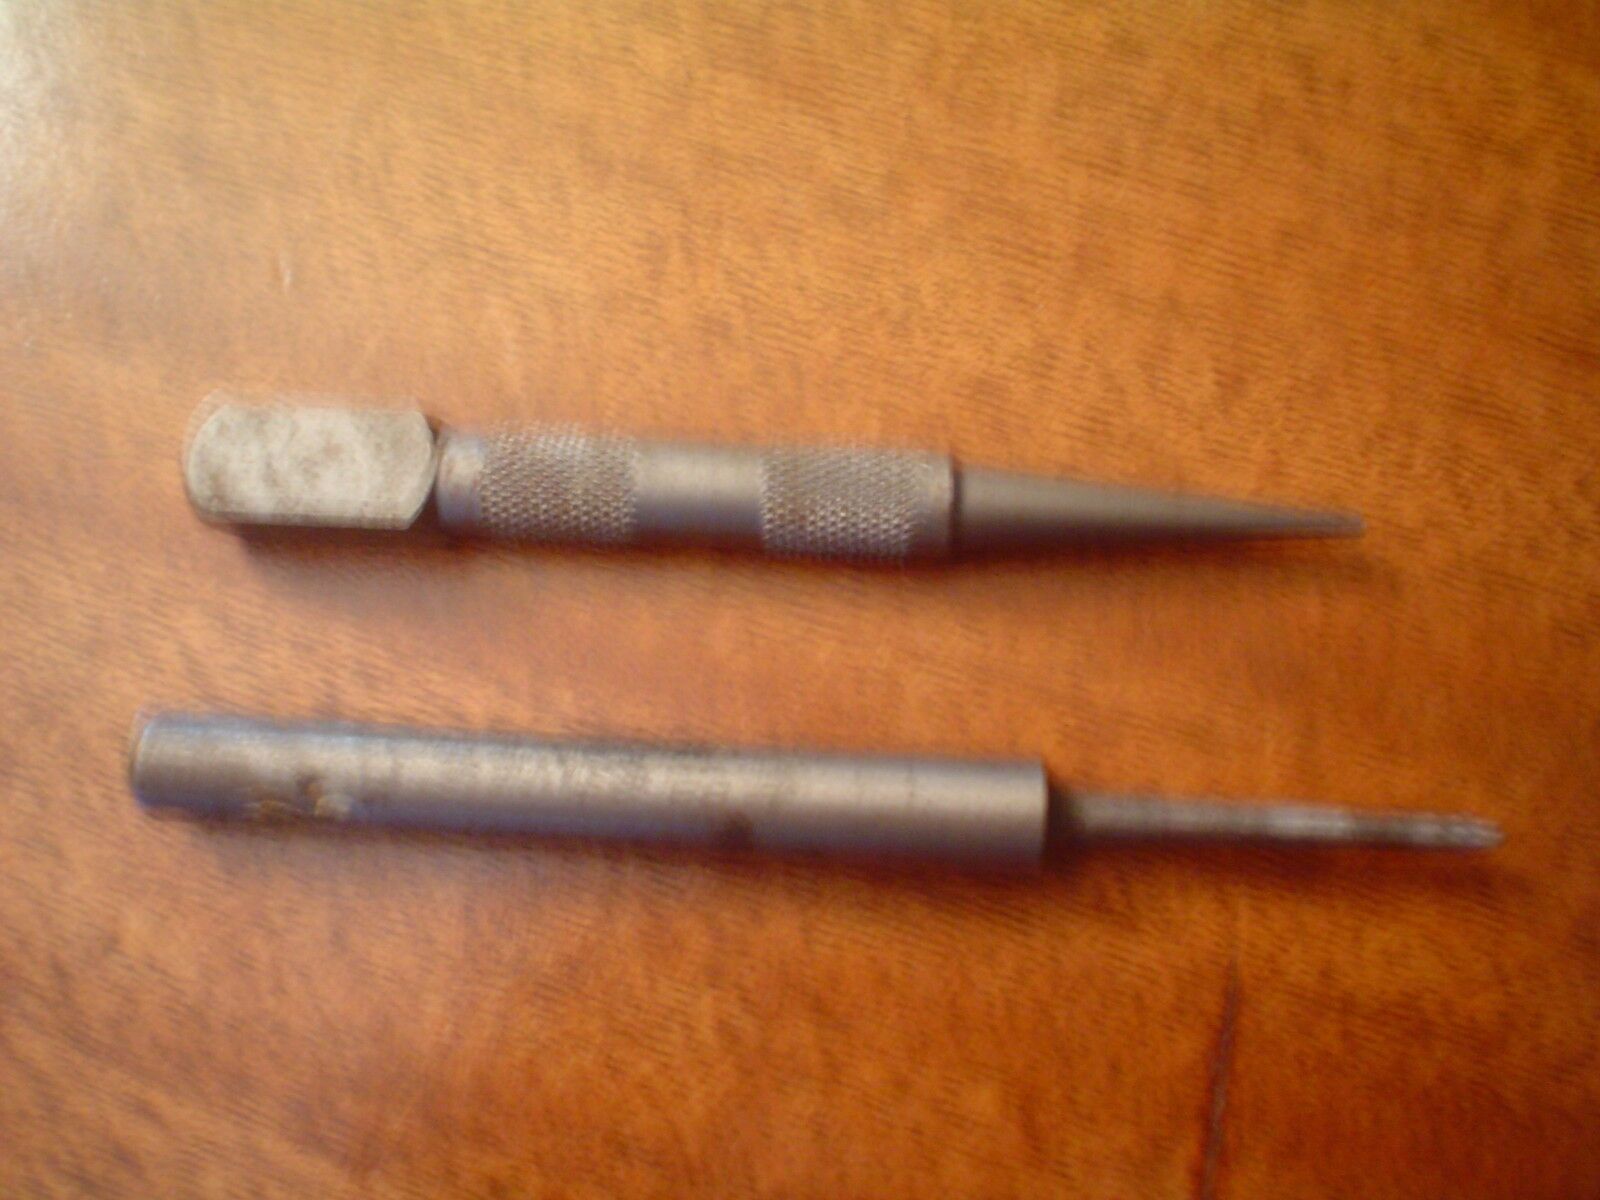 METAL PUNCHES HAND LOT OF 2 METAL WORKER TOOLS VINTAGE 